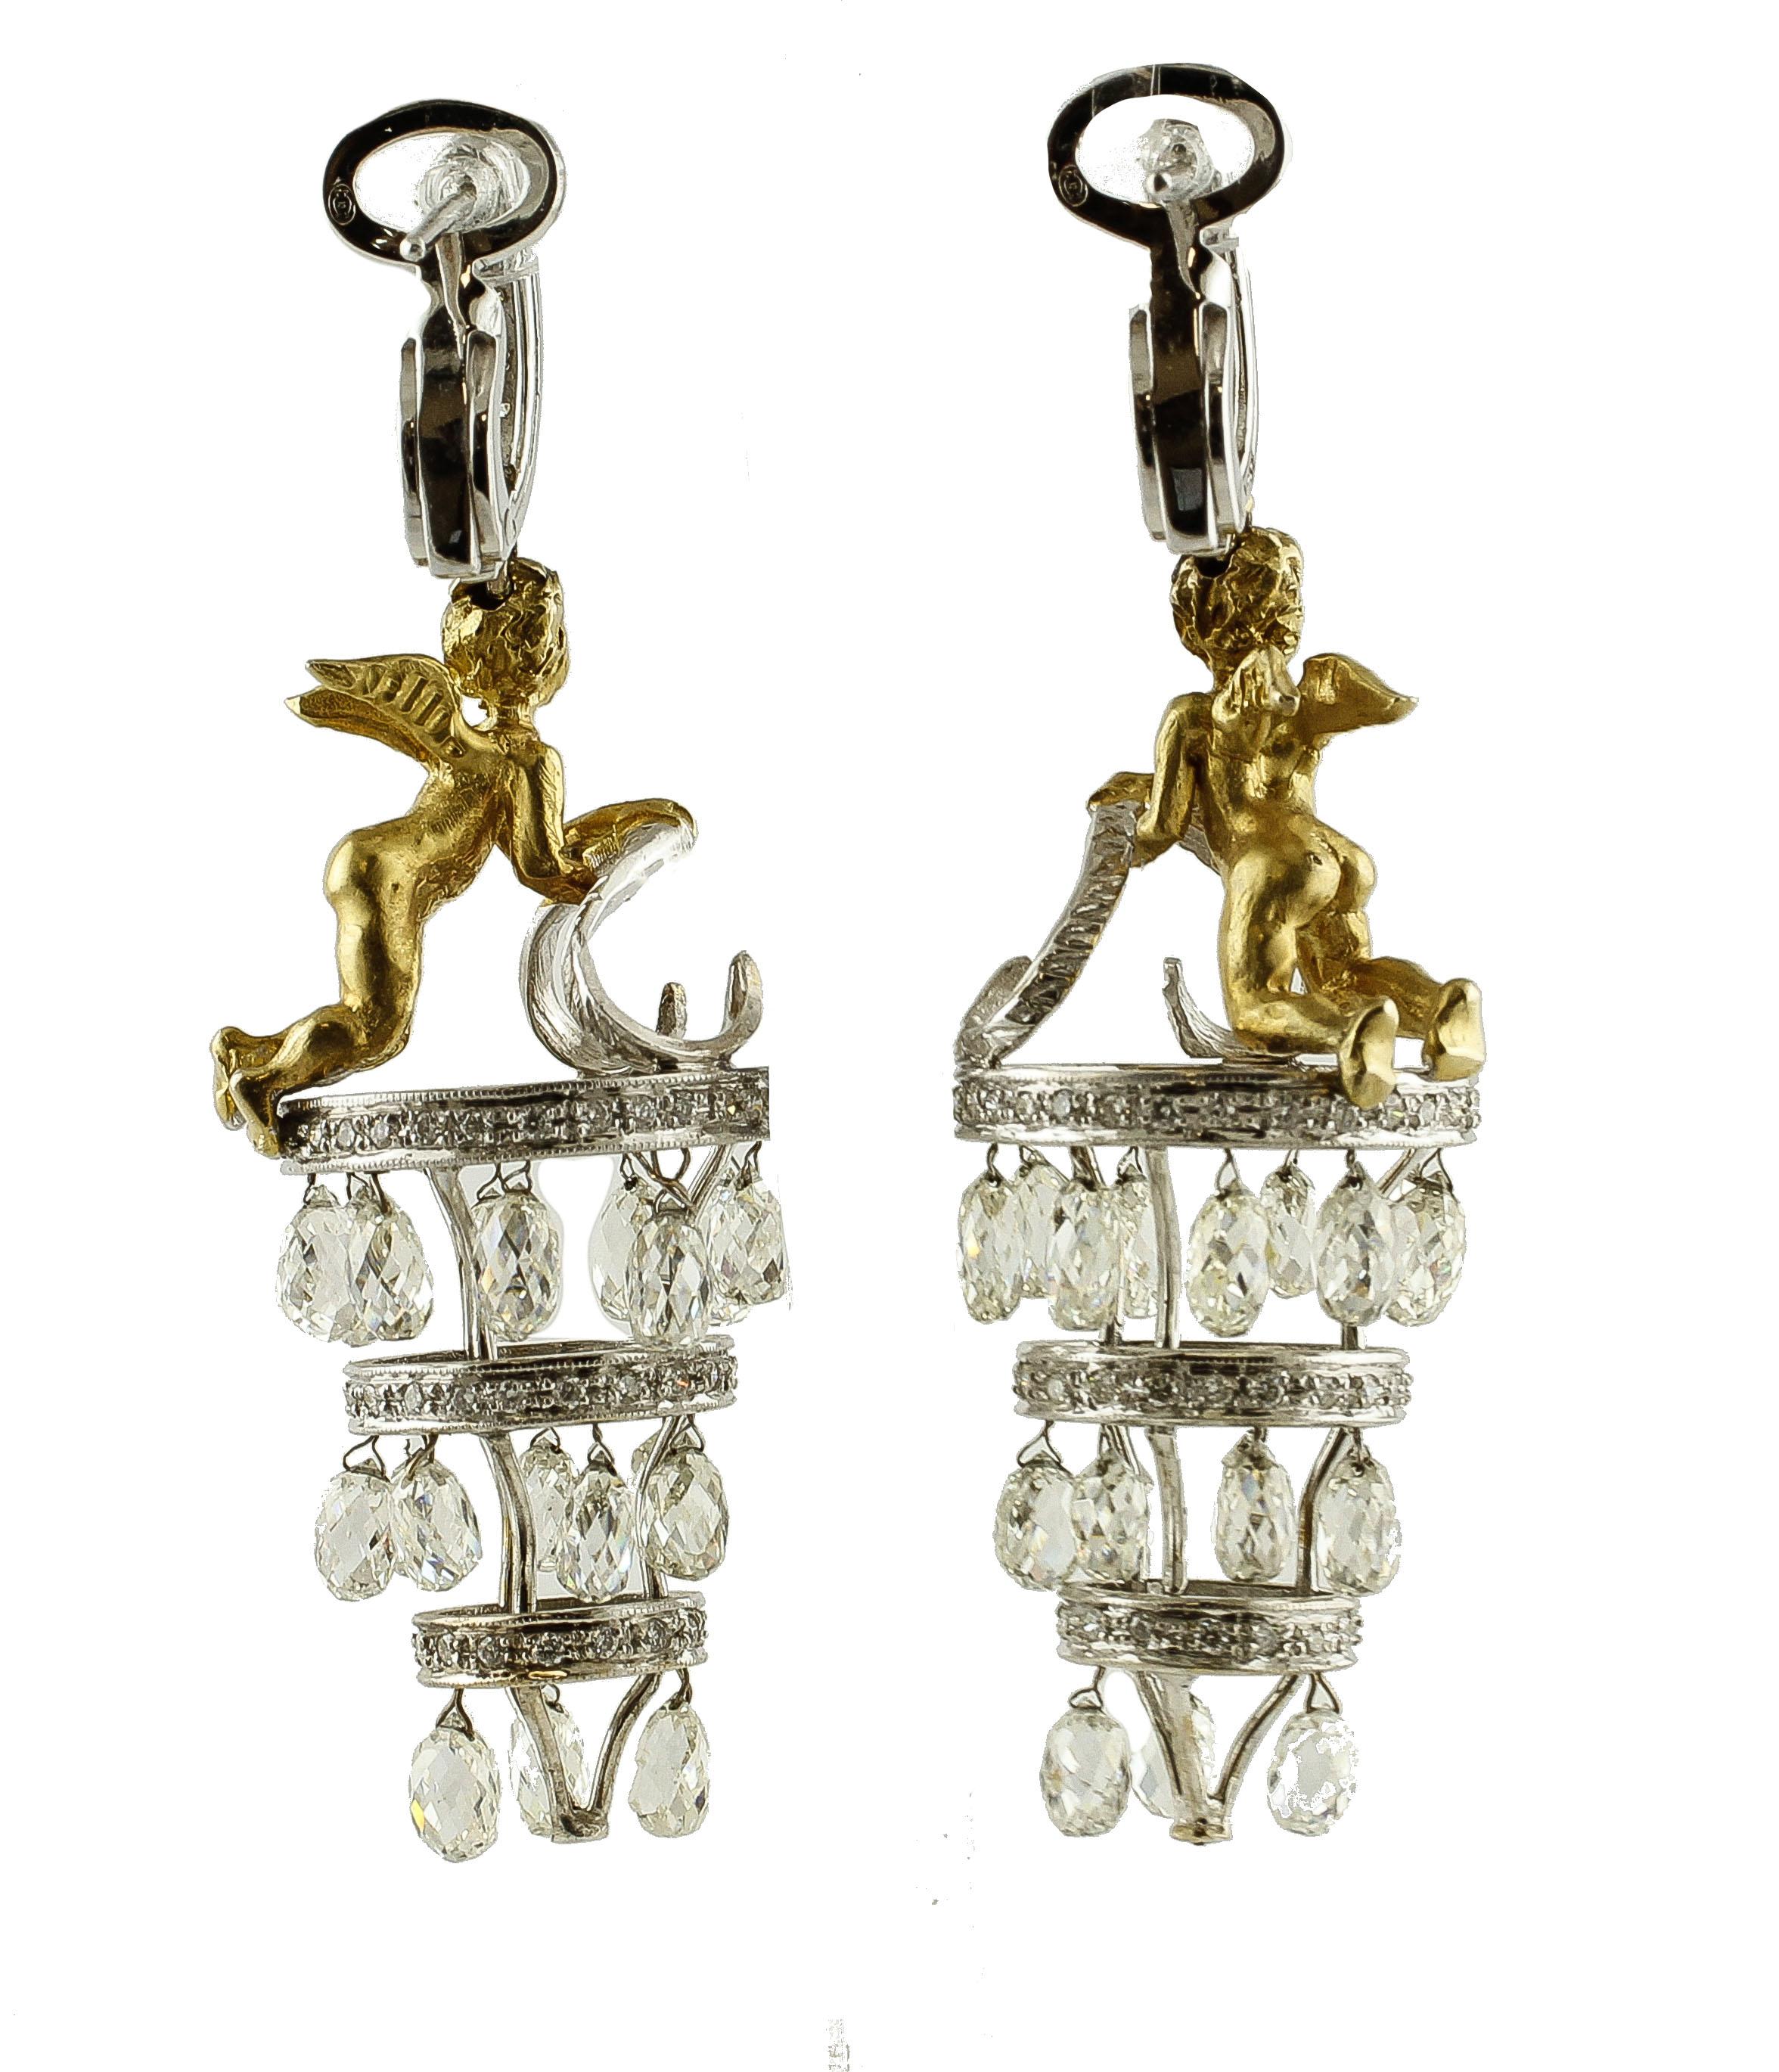 Astonishing pair of dangle earrings in 18k white and yellow gold structure. The earrings feature an angel realized in yellow gold, on a cylindrical structure realized with 3 white gold circles of different sizes studded with diamonds. Below each